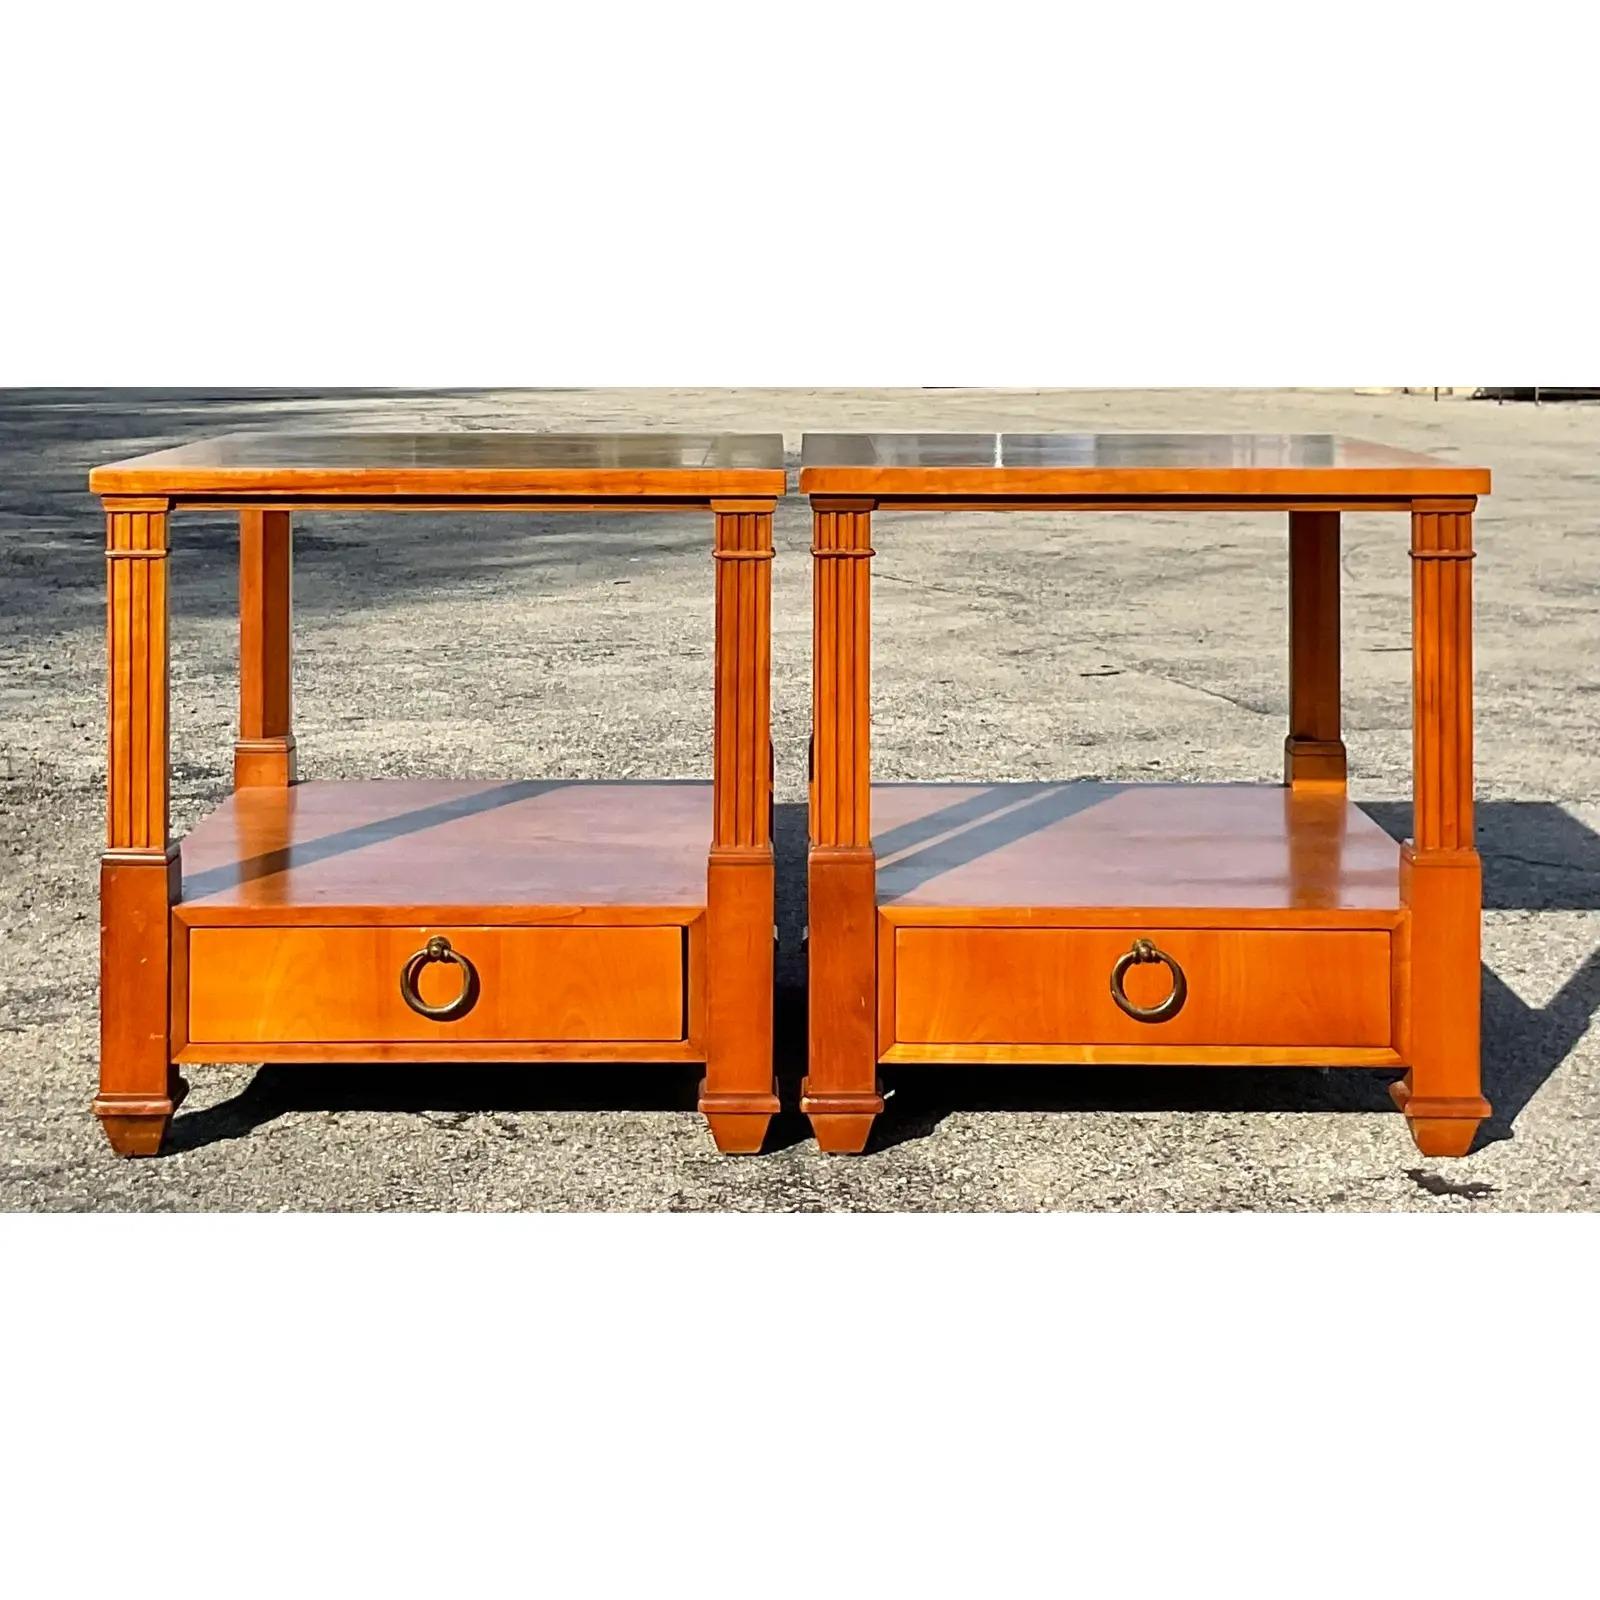 A fabulous pair of vintage Neoclassical nightstands. Made by the legendary Baker furniture group. Beautiful clean design with gorgeous wood grain detail.